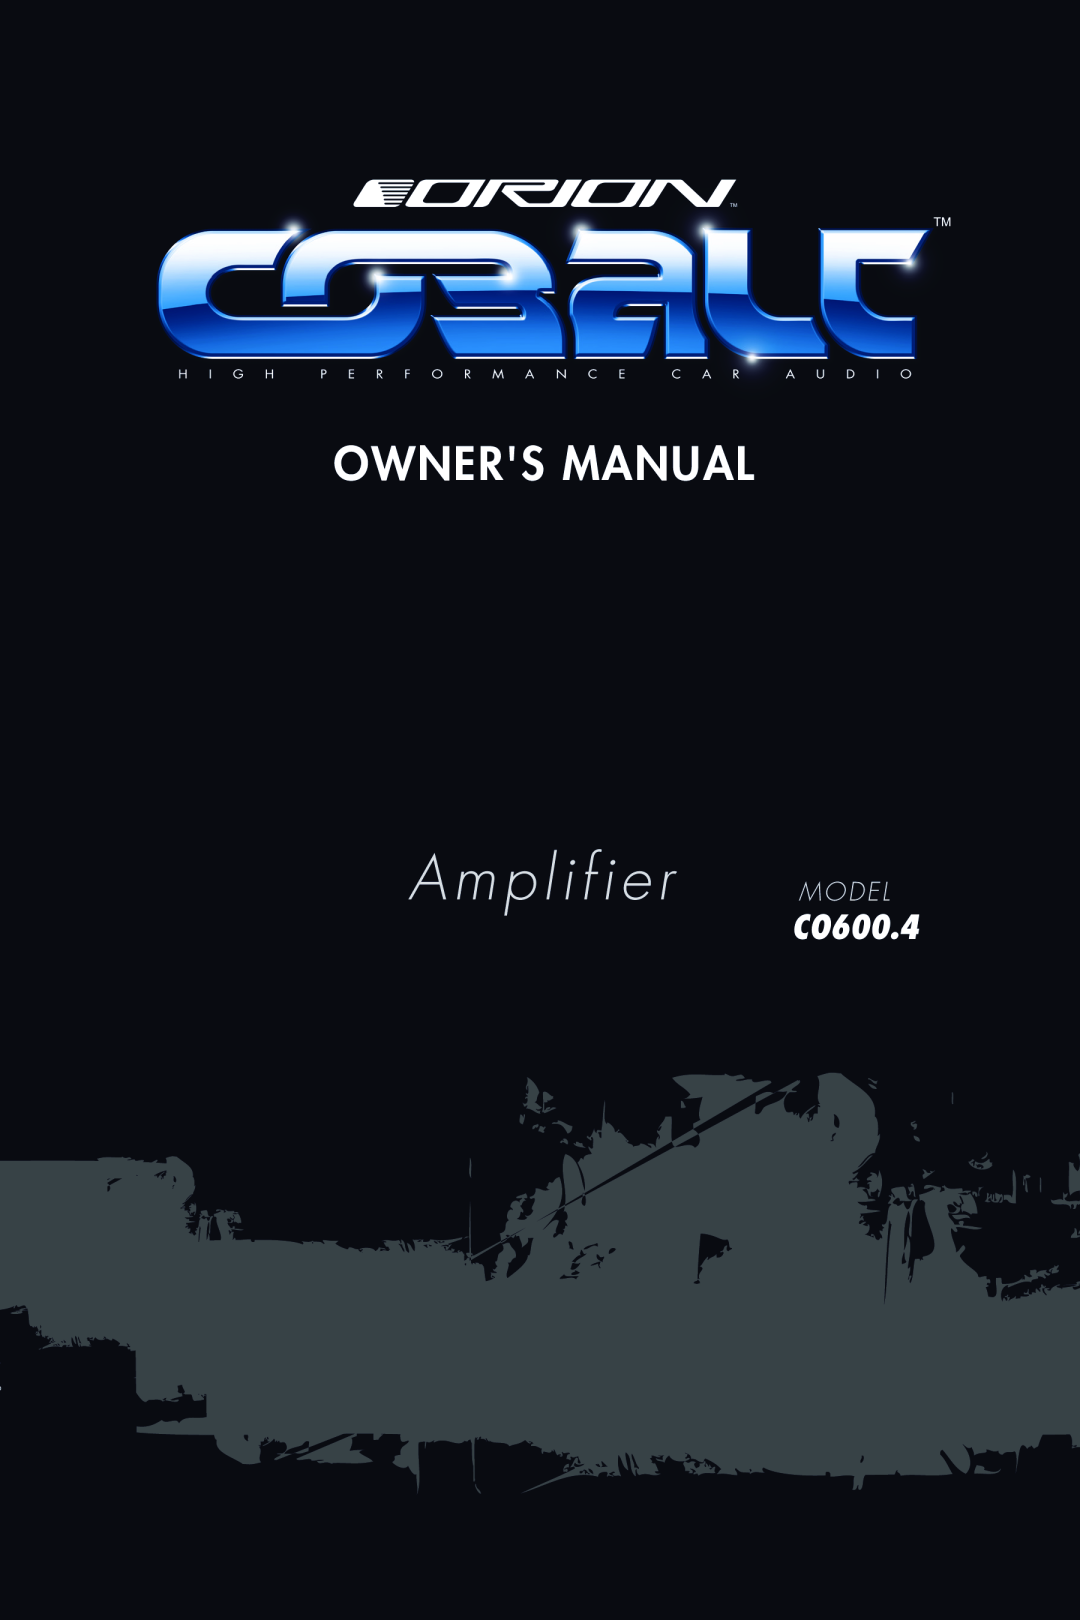 Orion G42110 owner manual Amplifier, Owners Manual, CO600.4, Model 